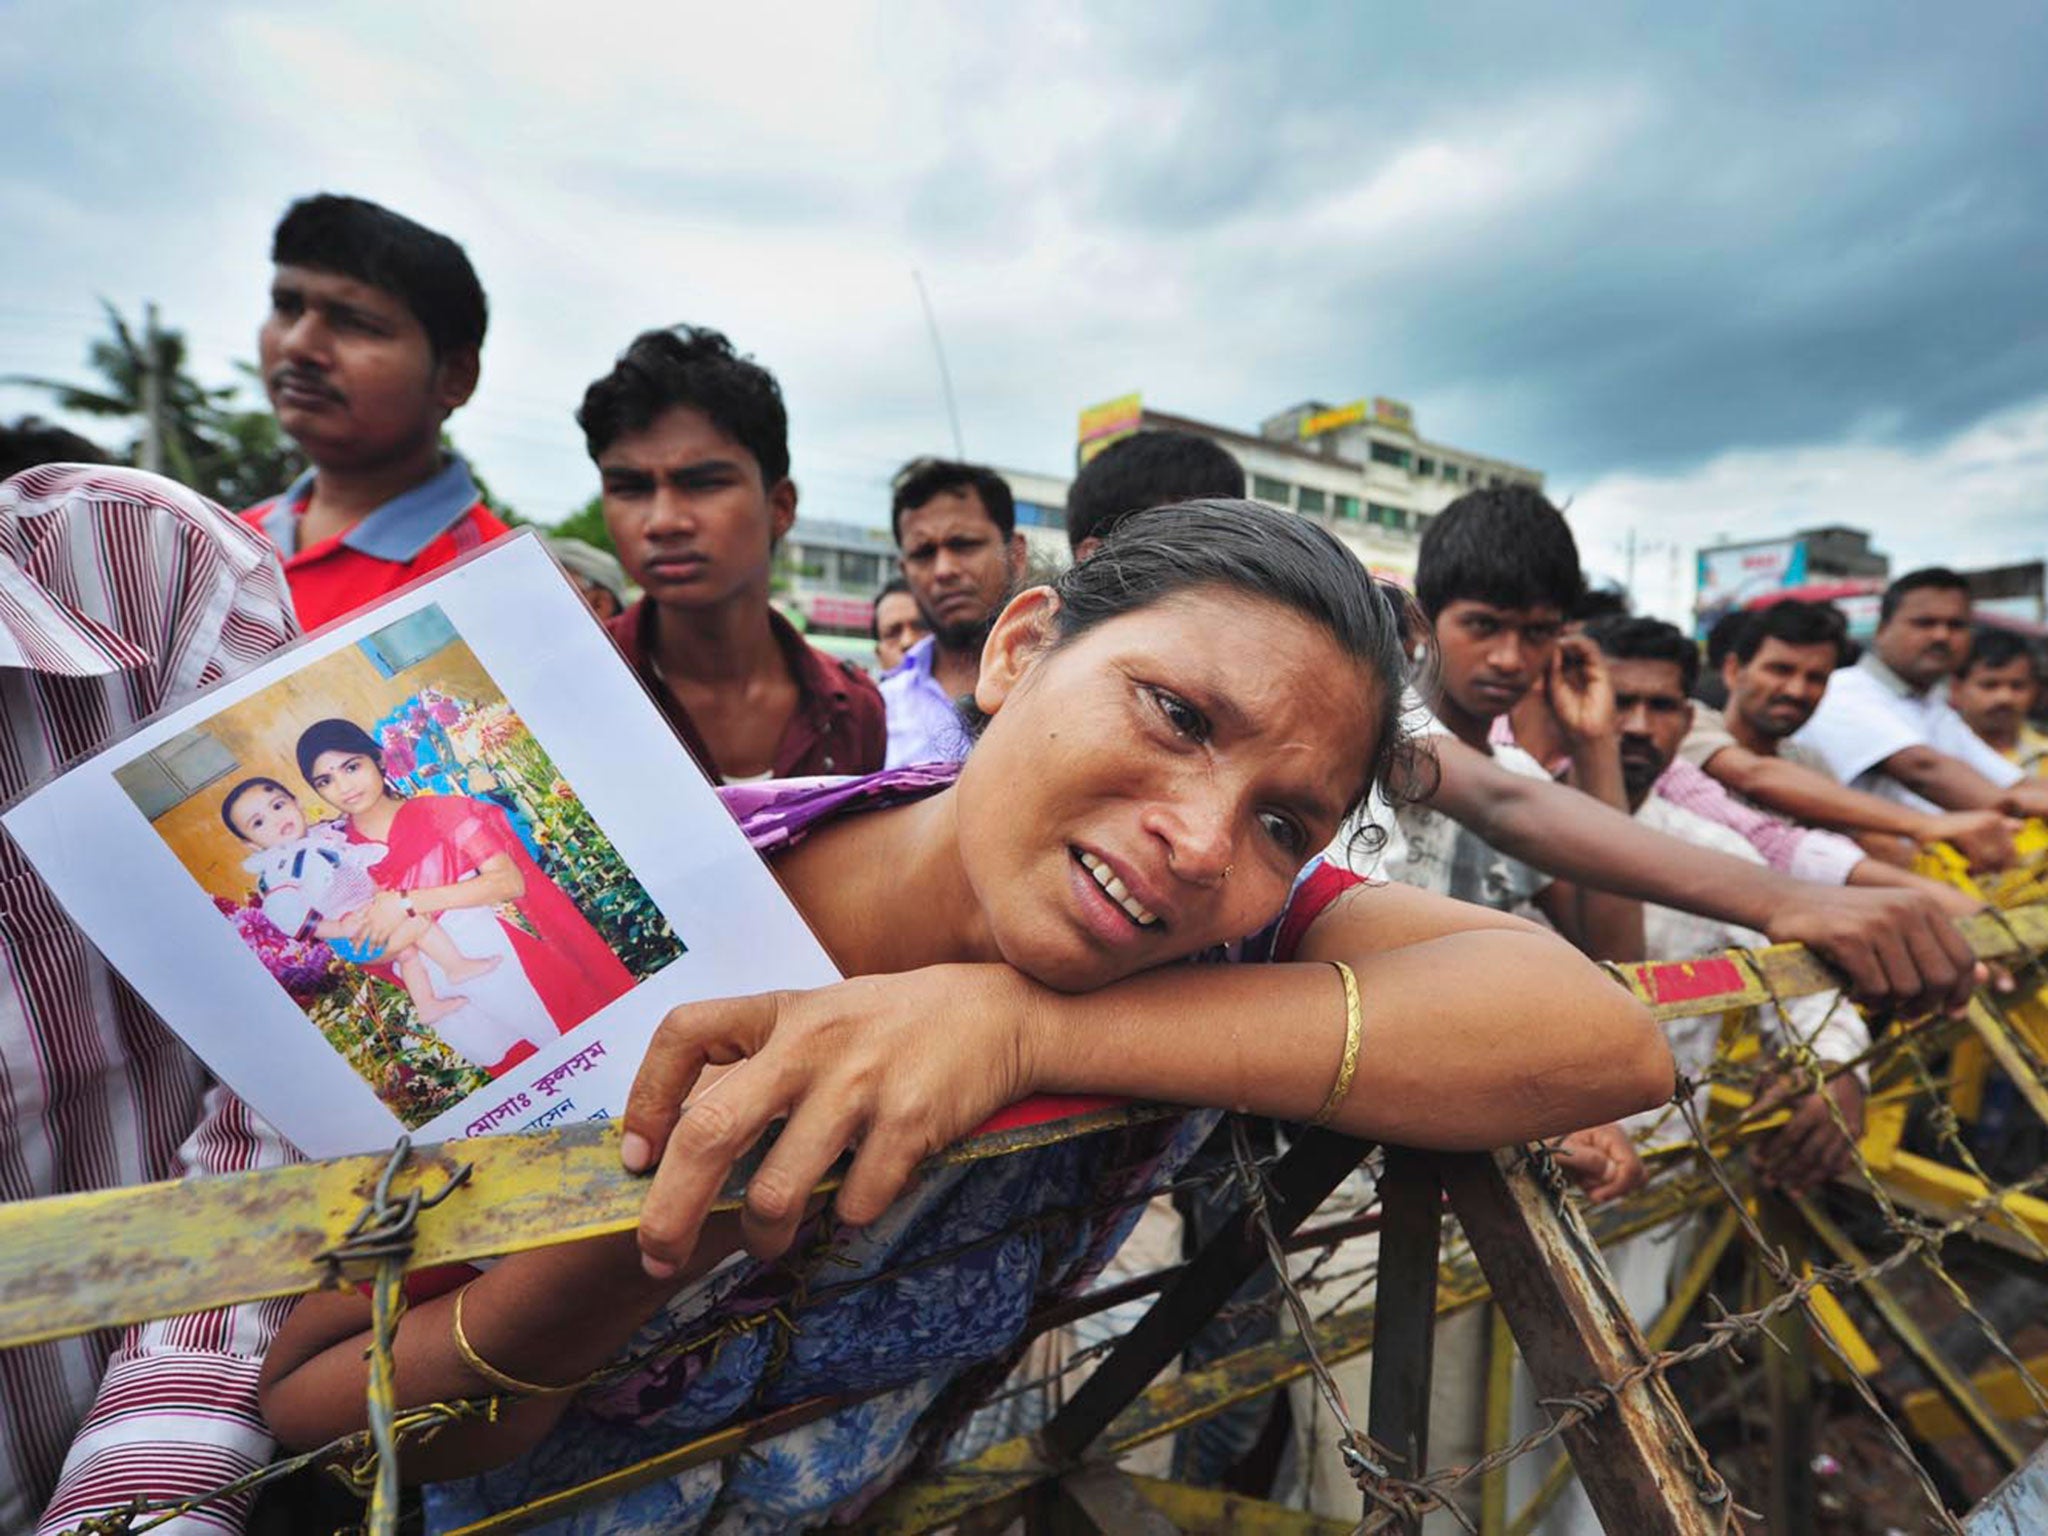 Protesters at the Rana Plaza site hold up pictures of victims of the disaster © Khorshed Alam Rinku